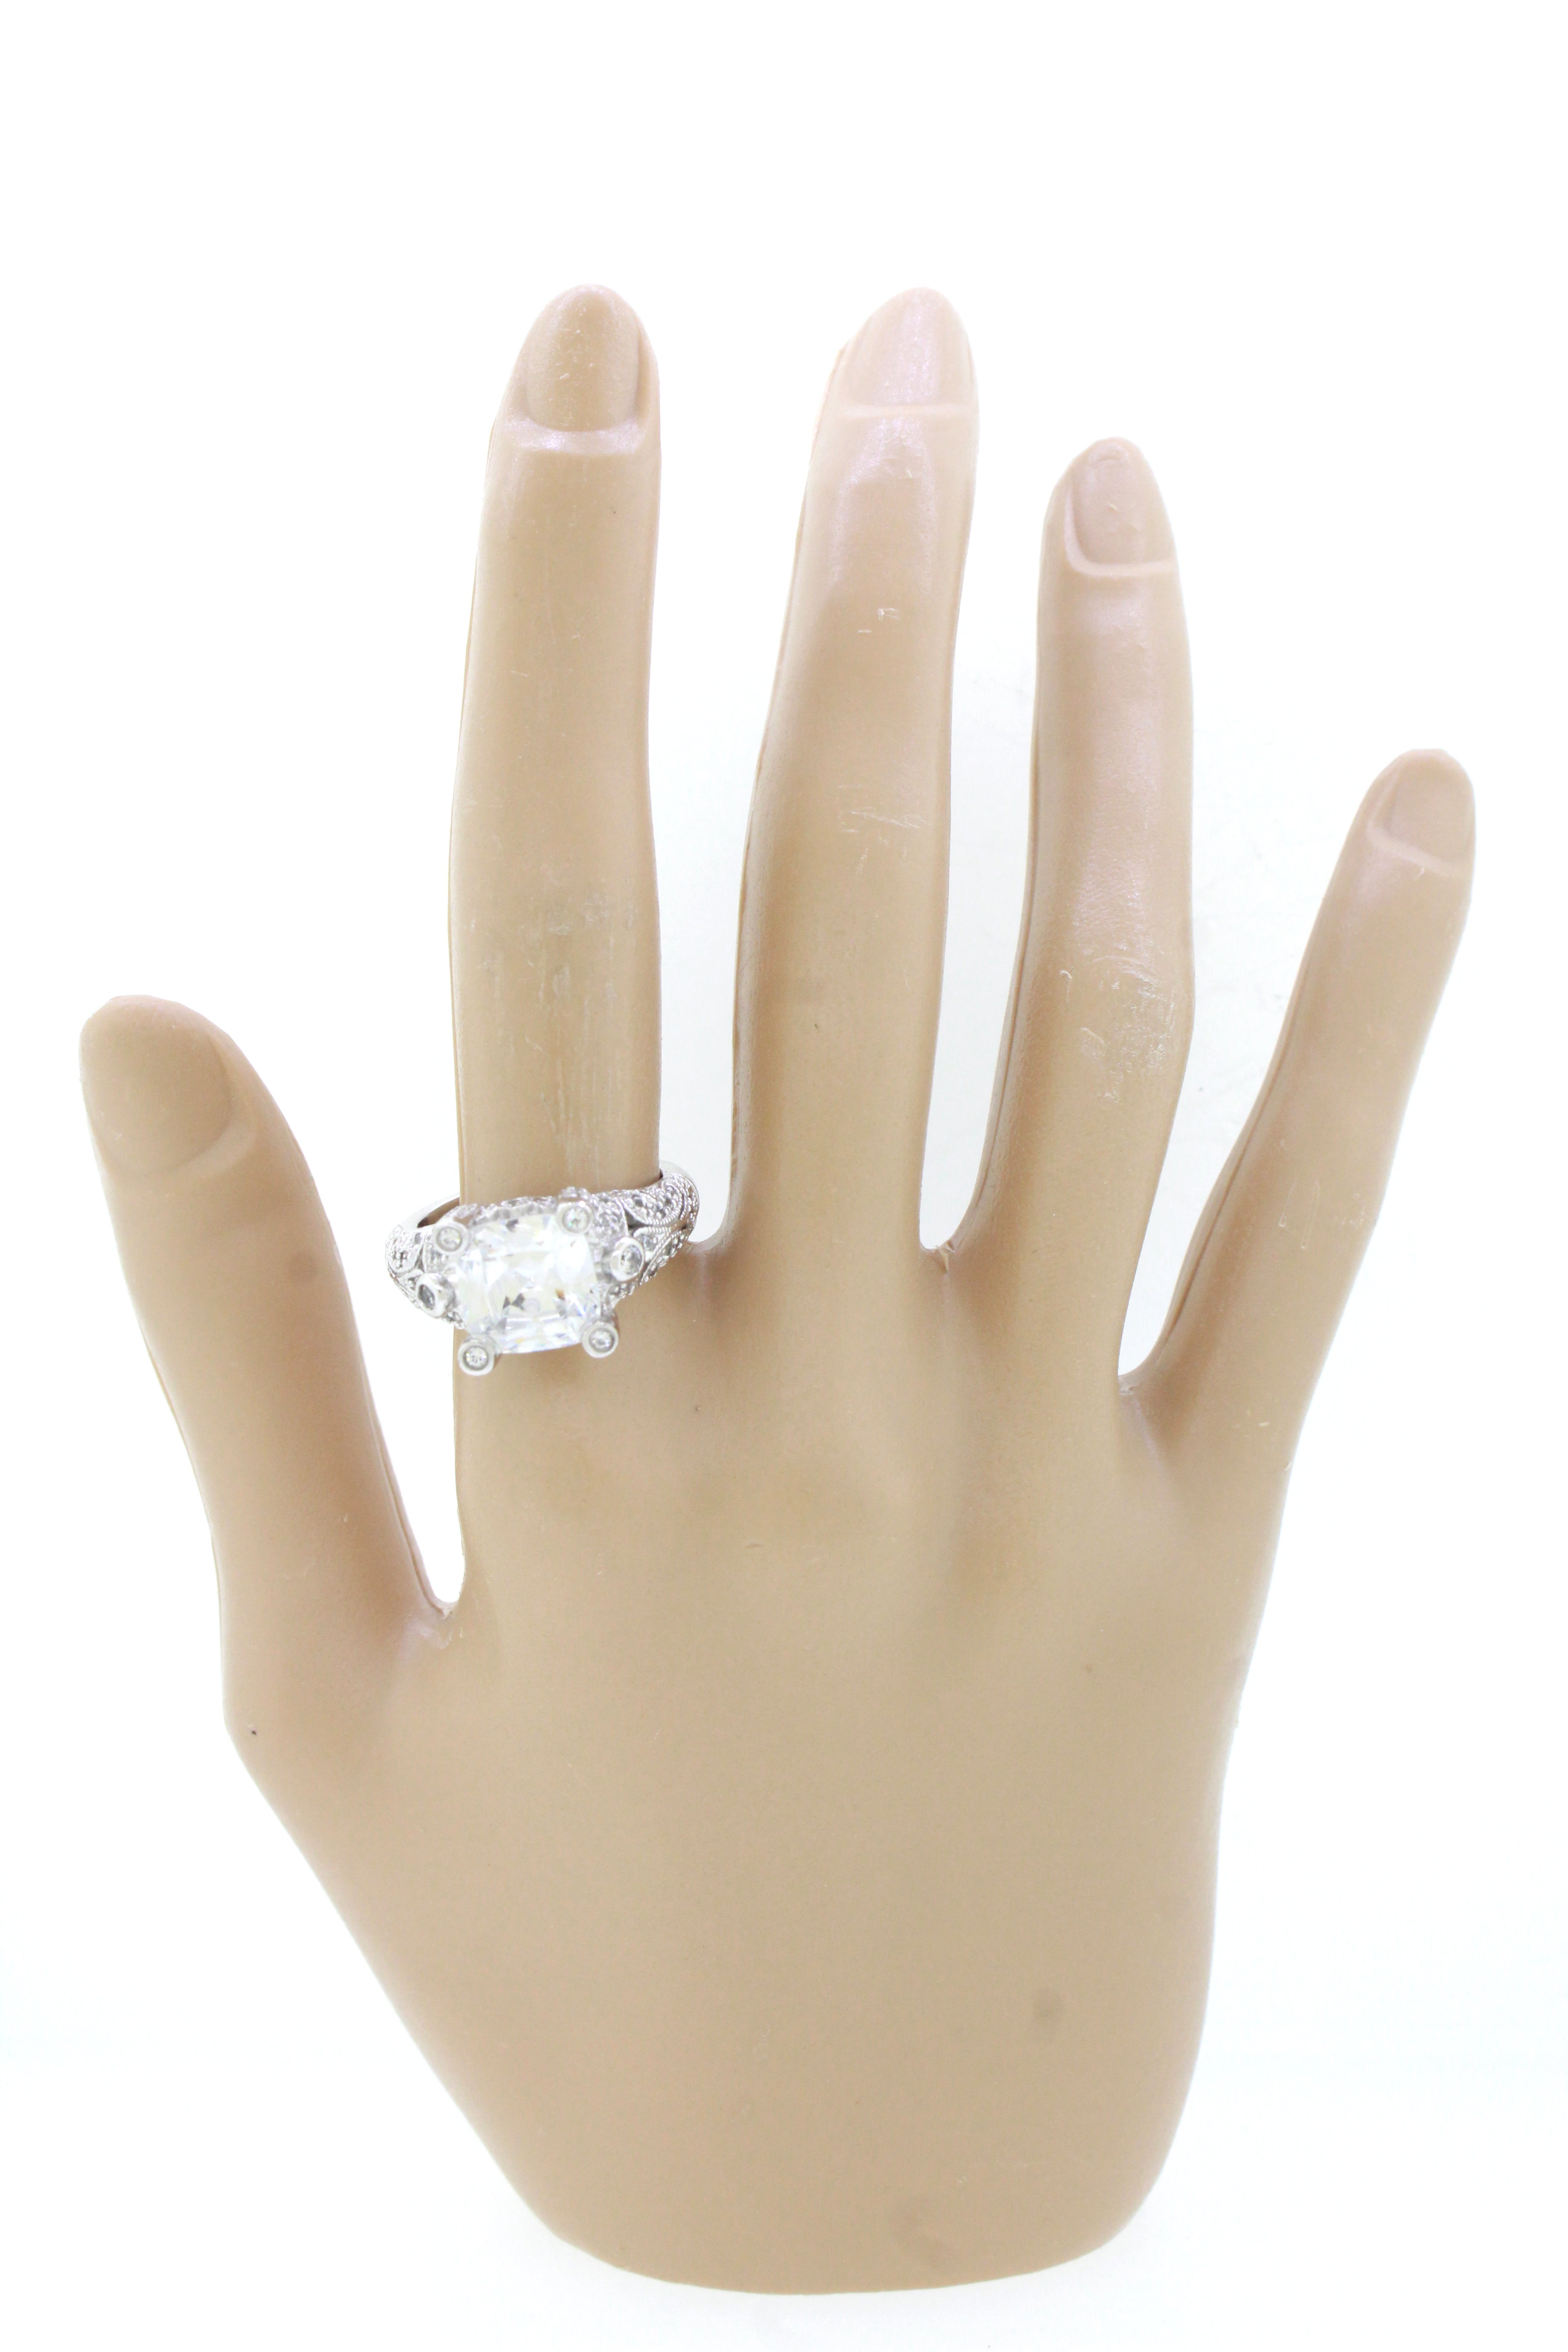 Modern 925 Sterling Silver 5ct CZ Square Cocktail Ring